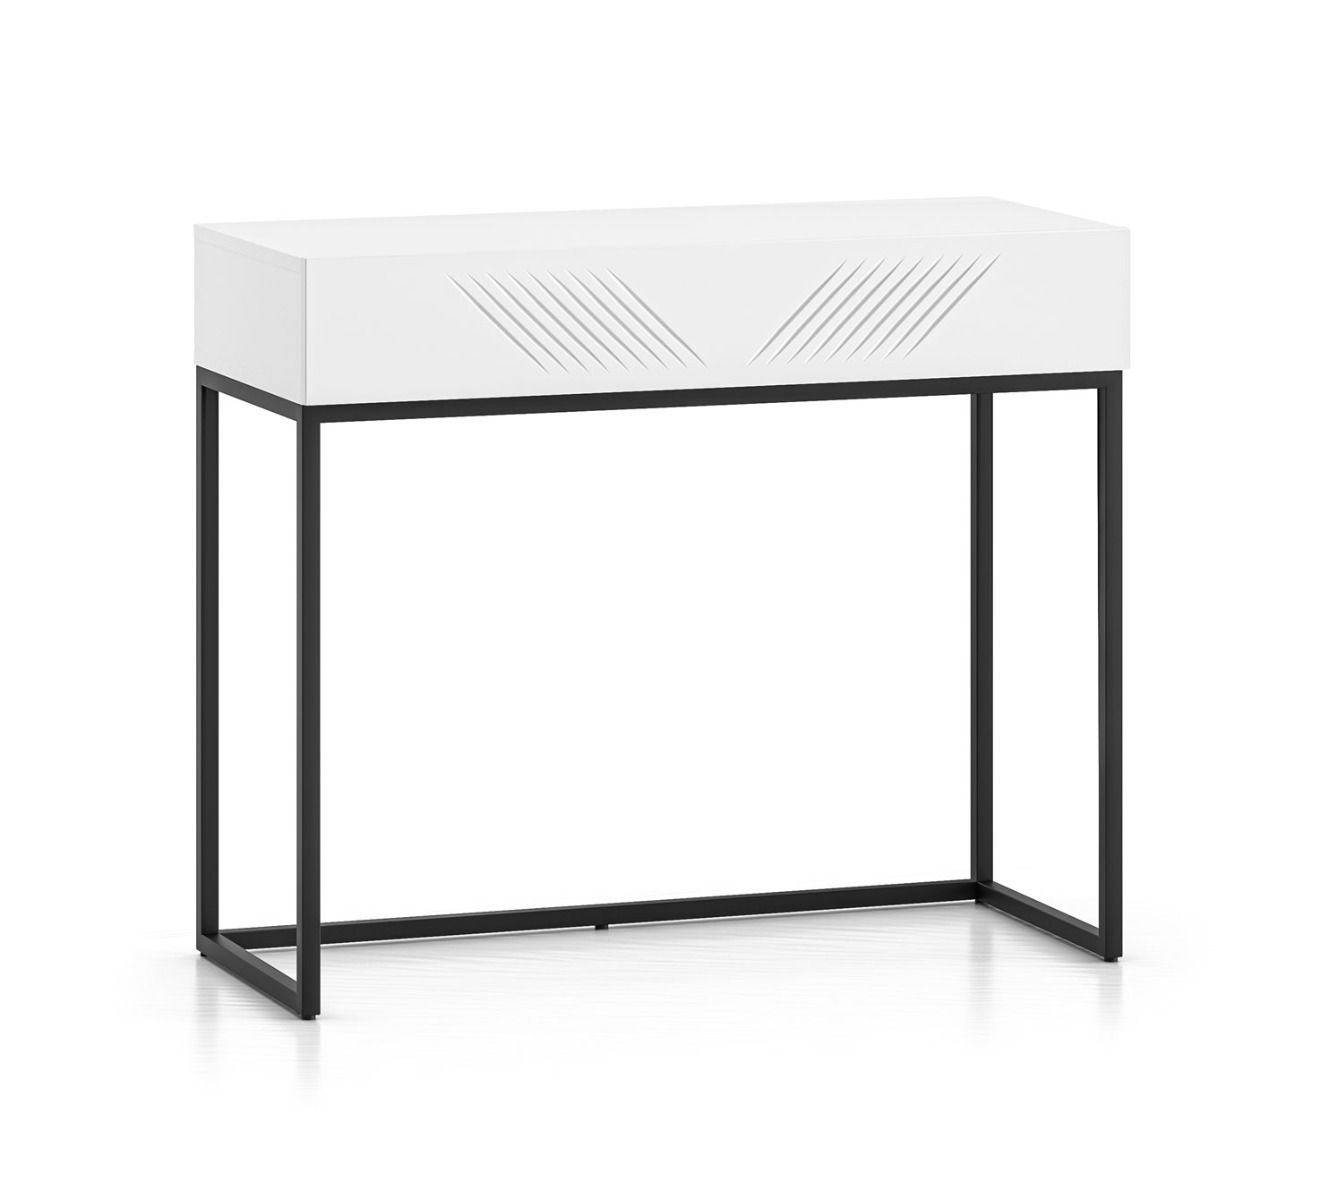 Modern dressing table with soft-close system Taos 21, with push-to-open function, color: white matt, dimensions: 78 x 92 x 40 cm, legs: black, with 1 drawer